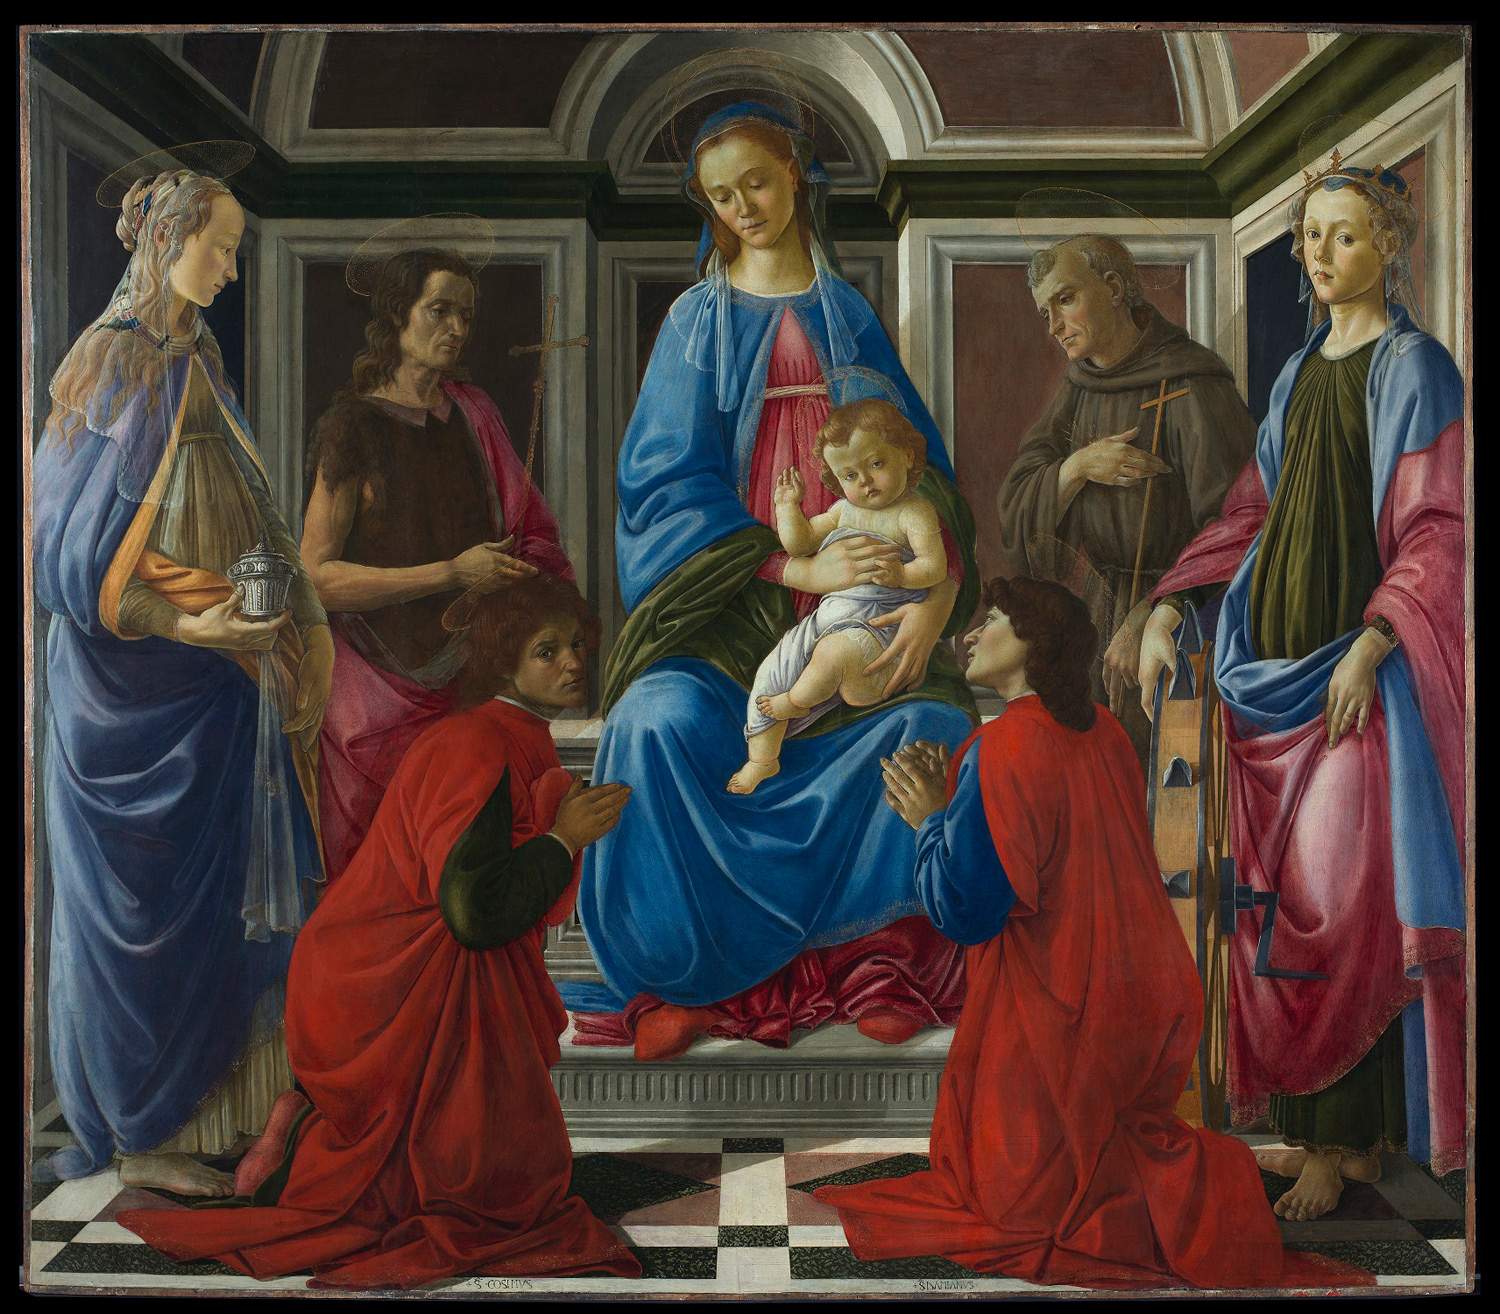 Uffizi, restoration of Botticelli's St. Ambrose Altarpiece reveals all the doubts and uncertainties about the young painter